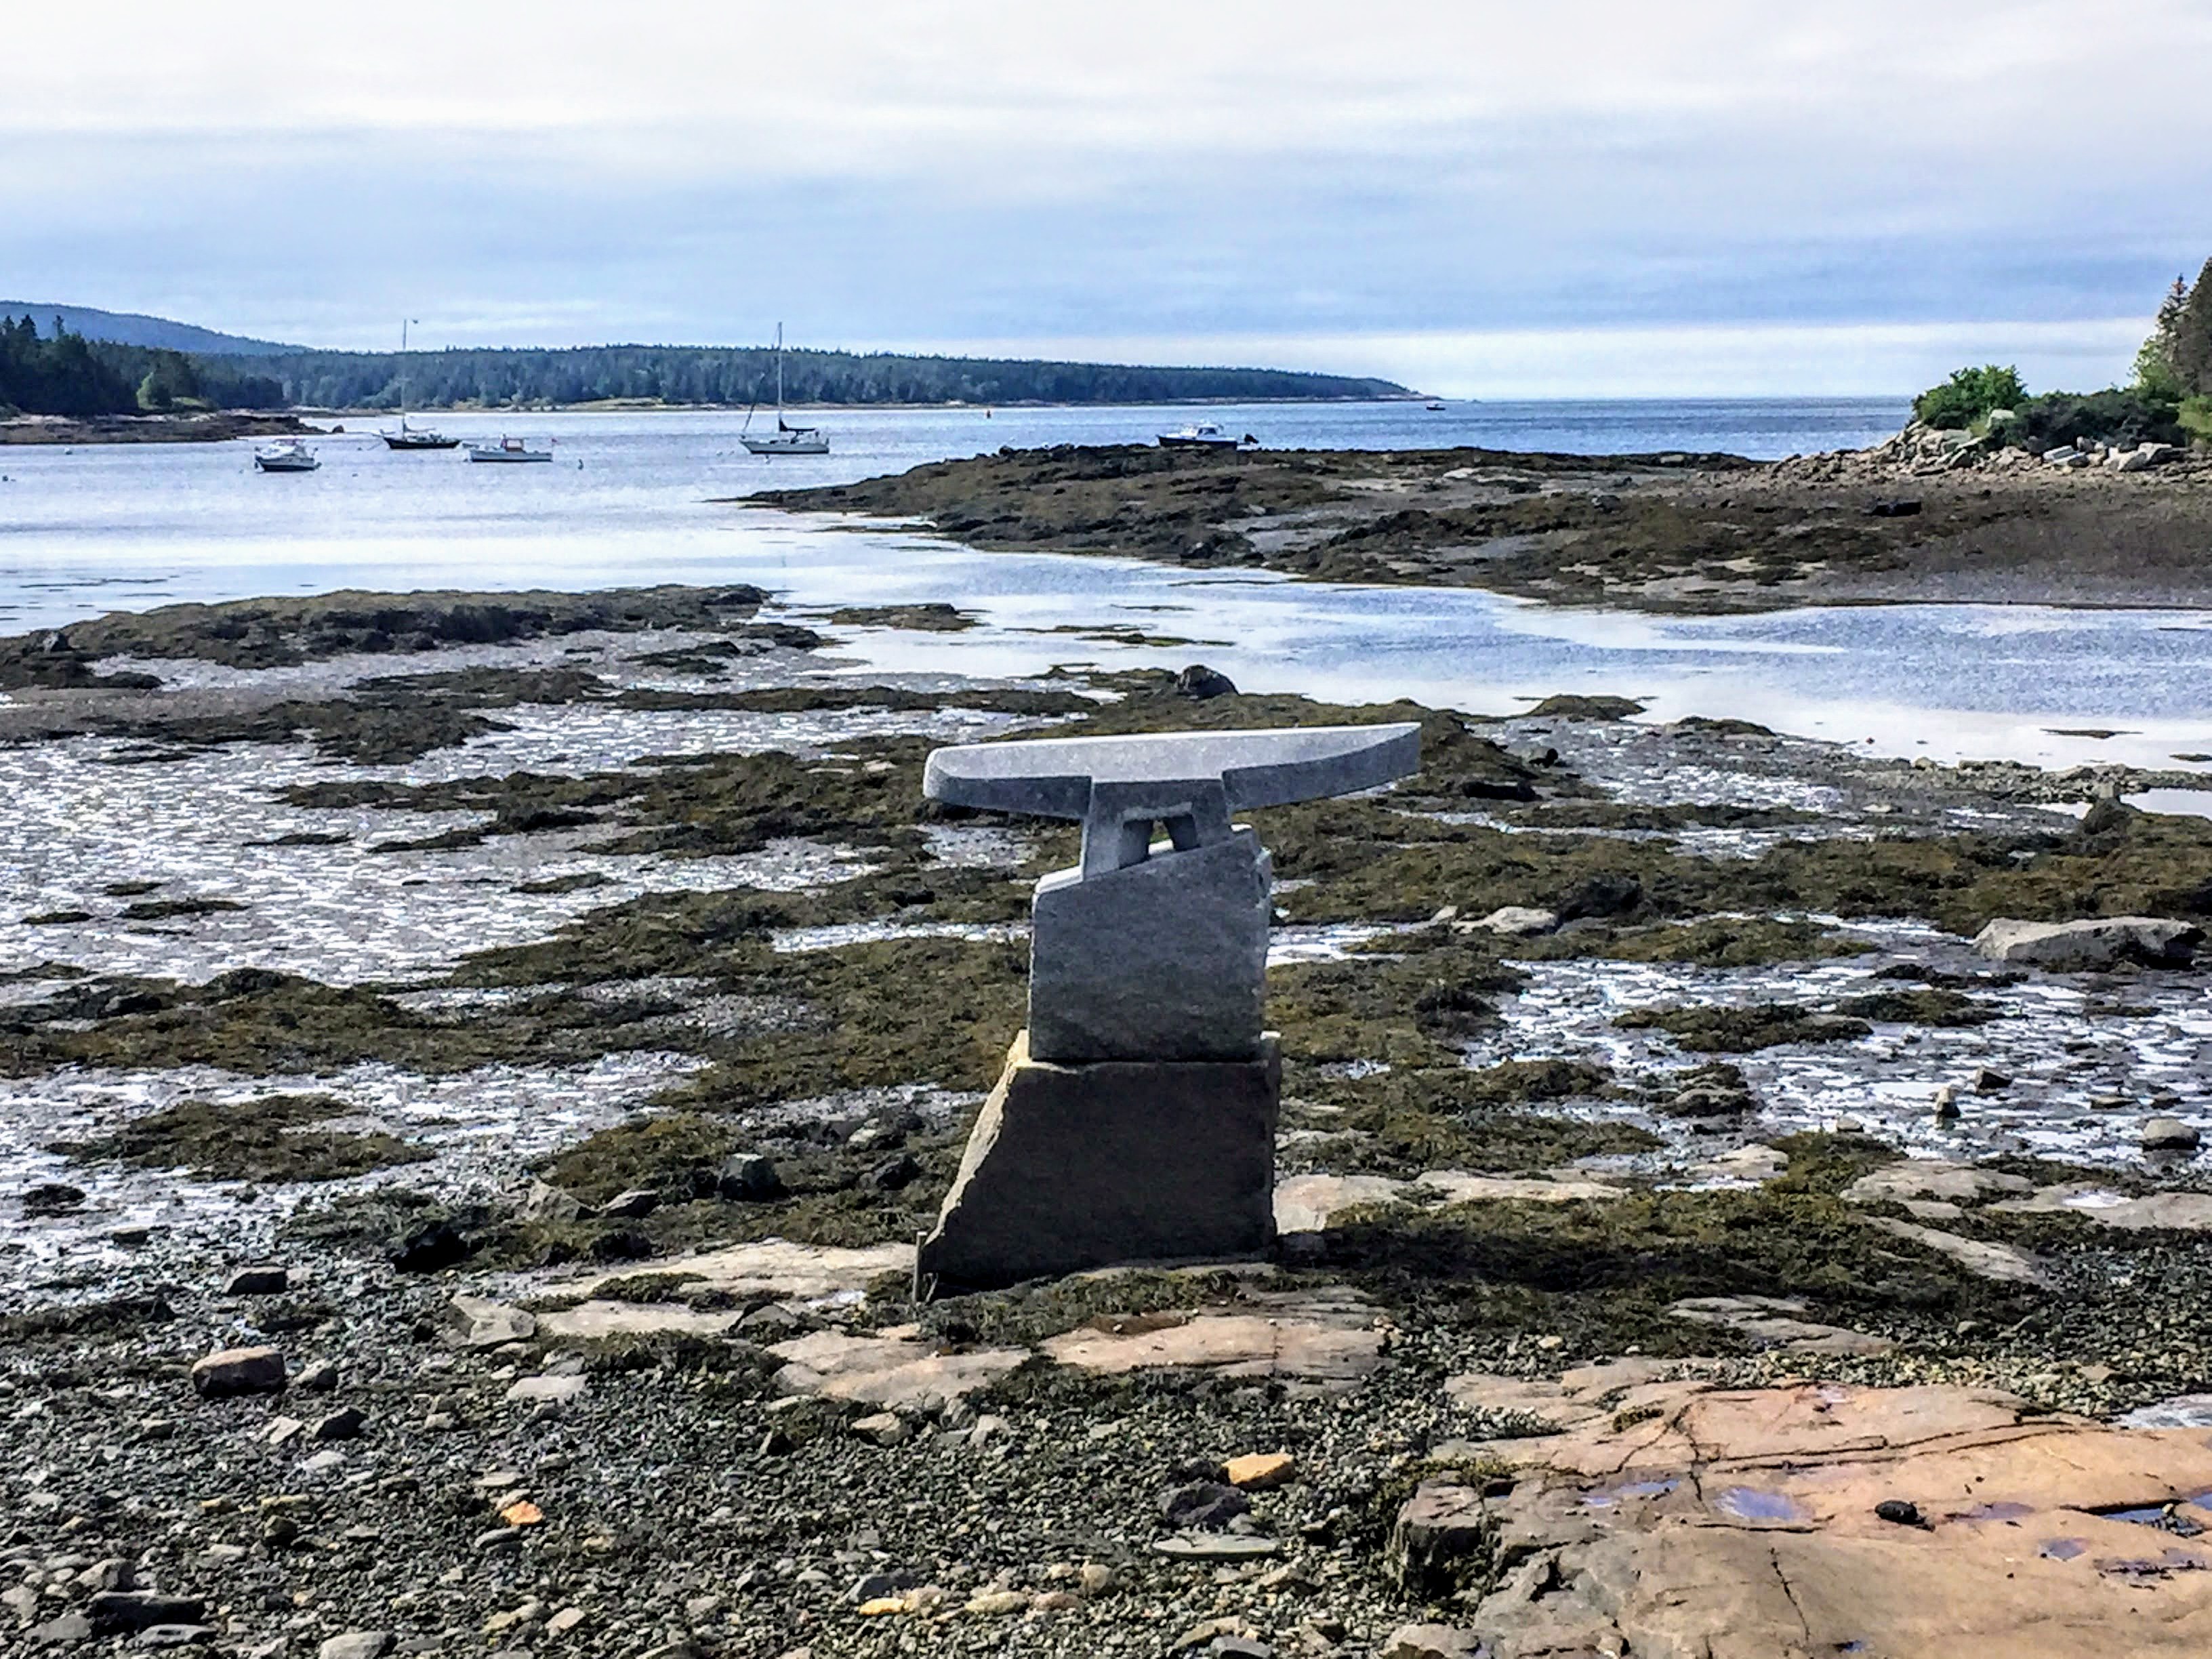 2017-07-25 Scoodic - Winter Harbor Whale Tail Sculpture 01